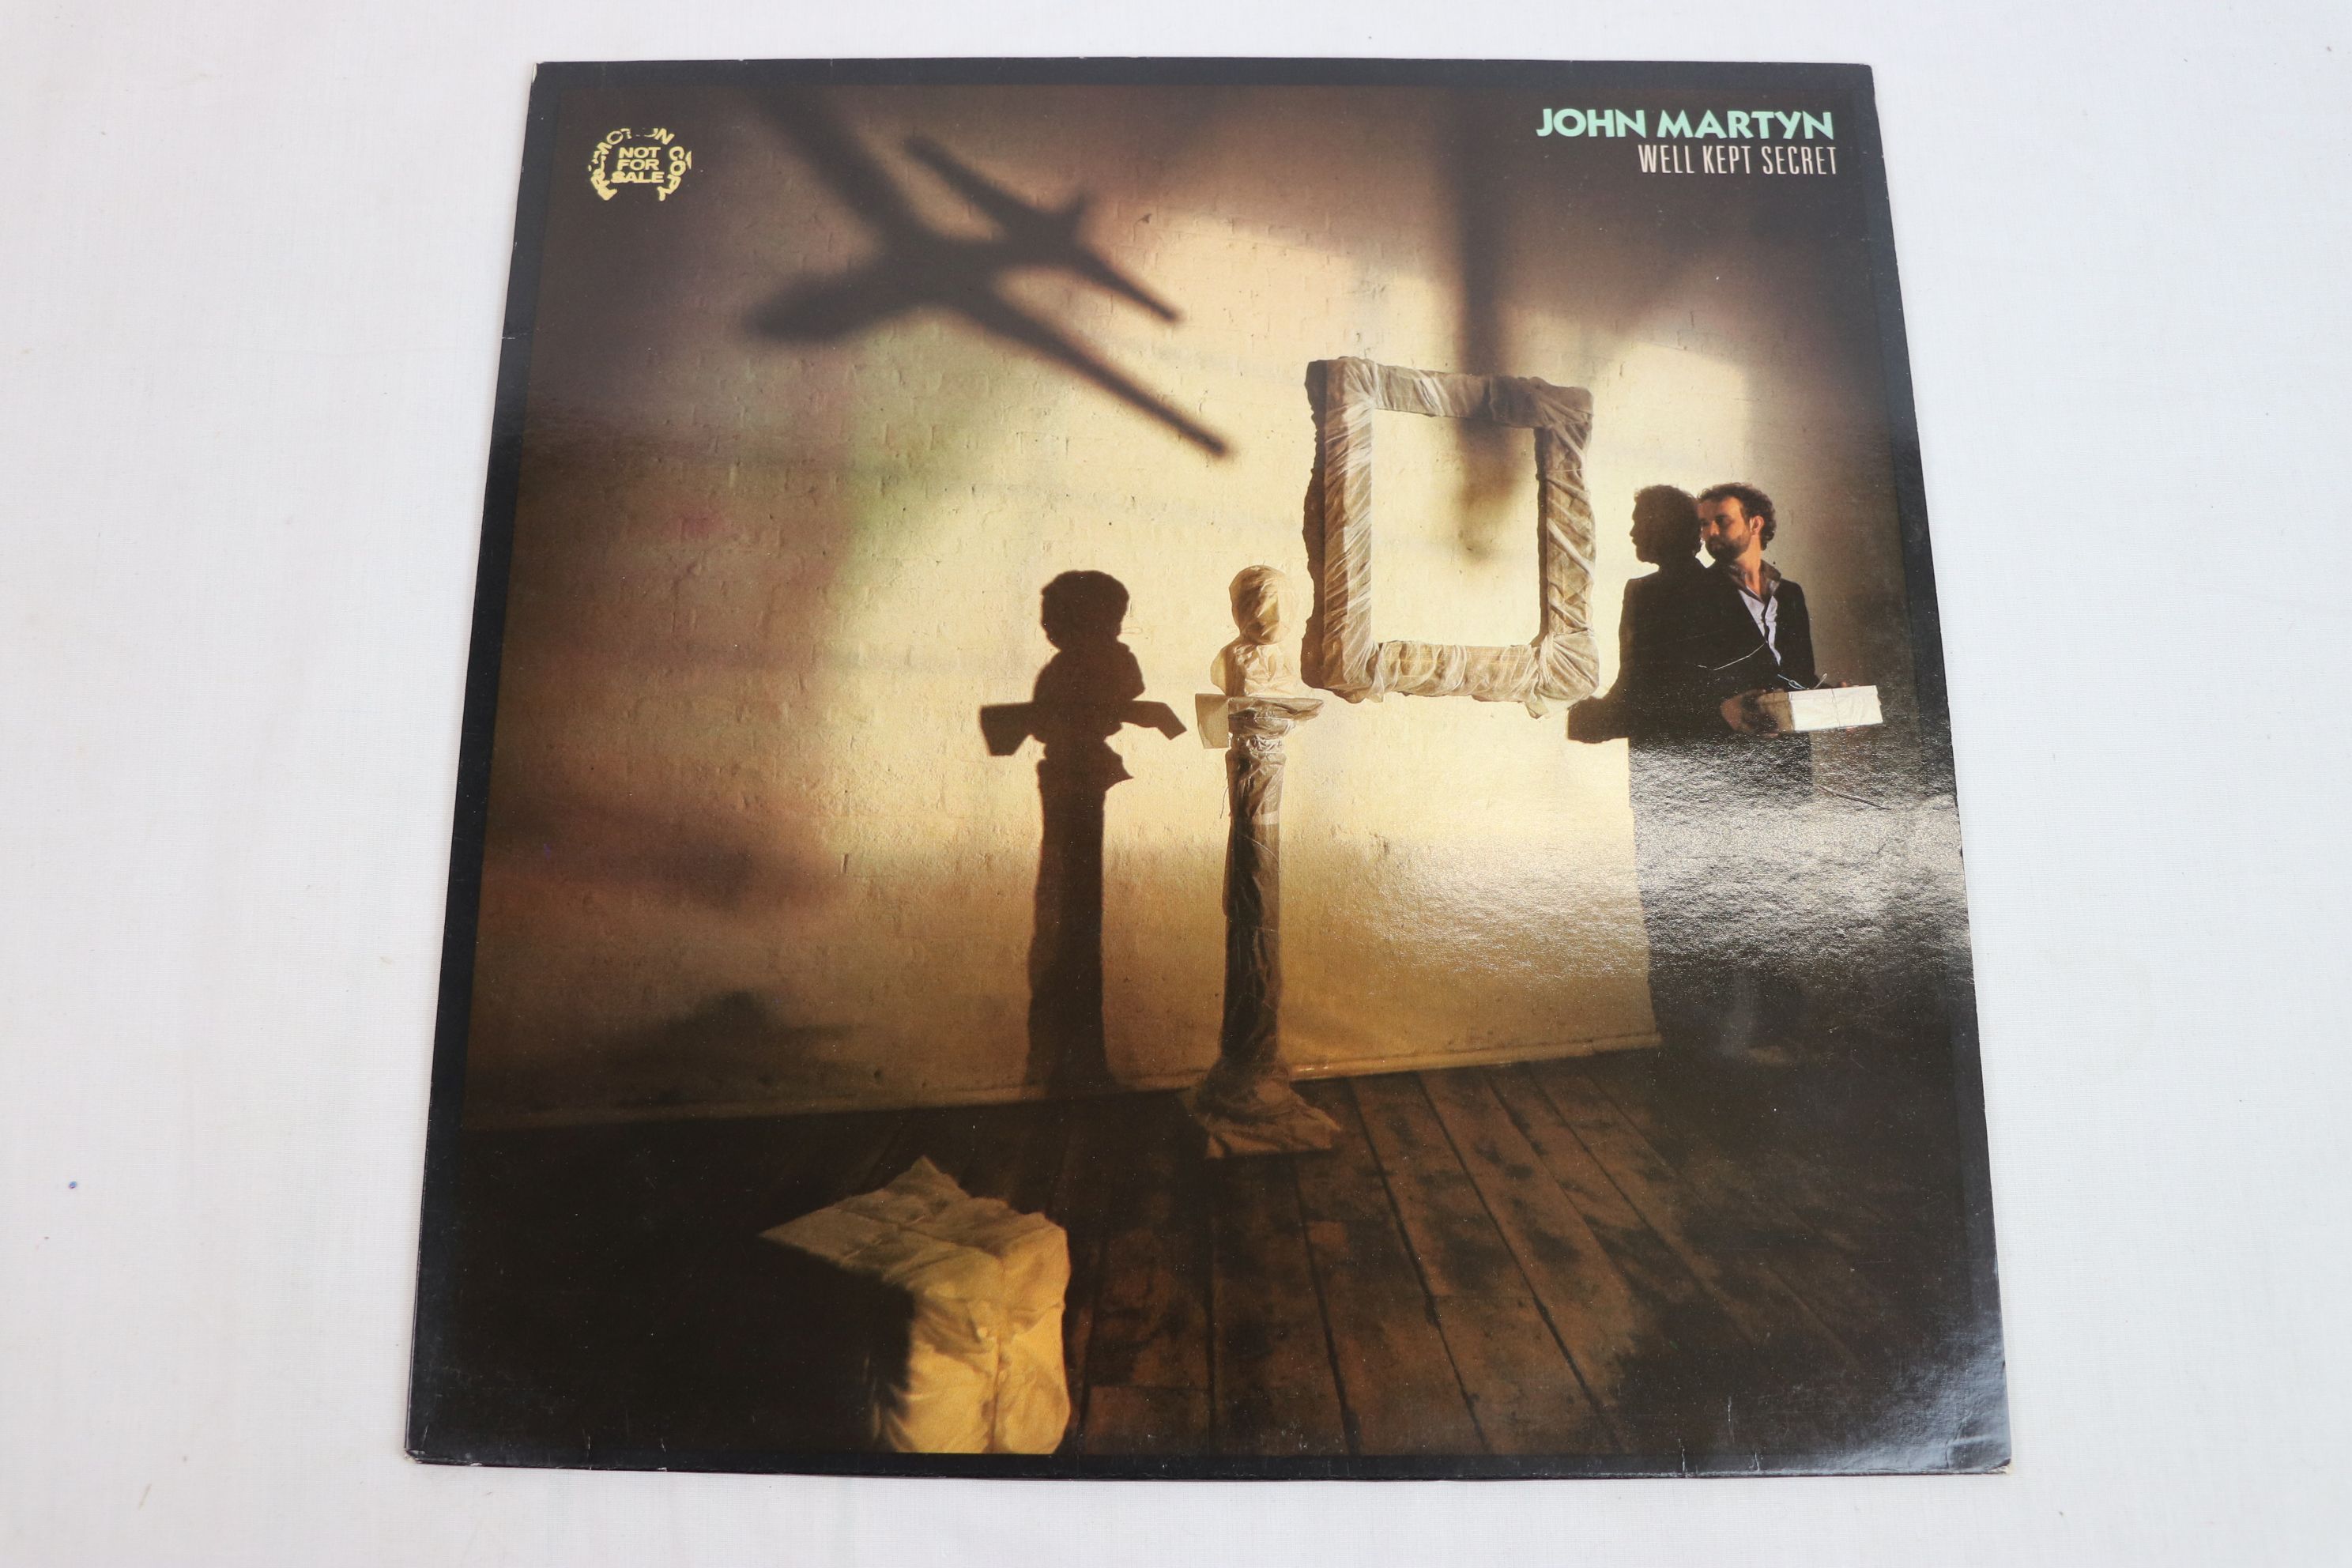 Vinyl - Six John Martyn LPs to include Solid Air, Inside Out, Sundays Child, Glorious Fool, Bless - Image 8 of 8